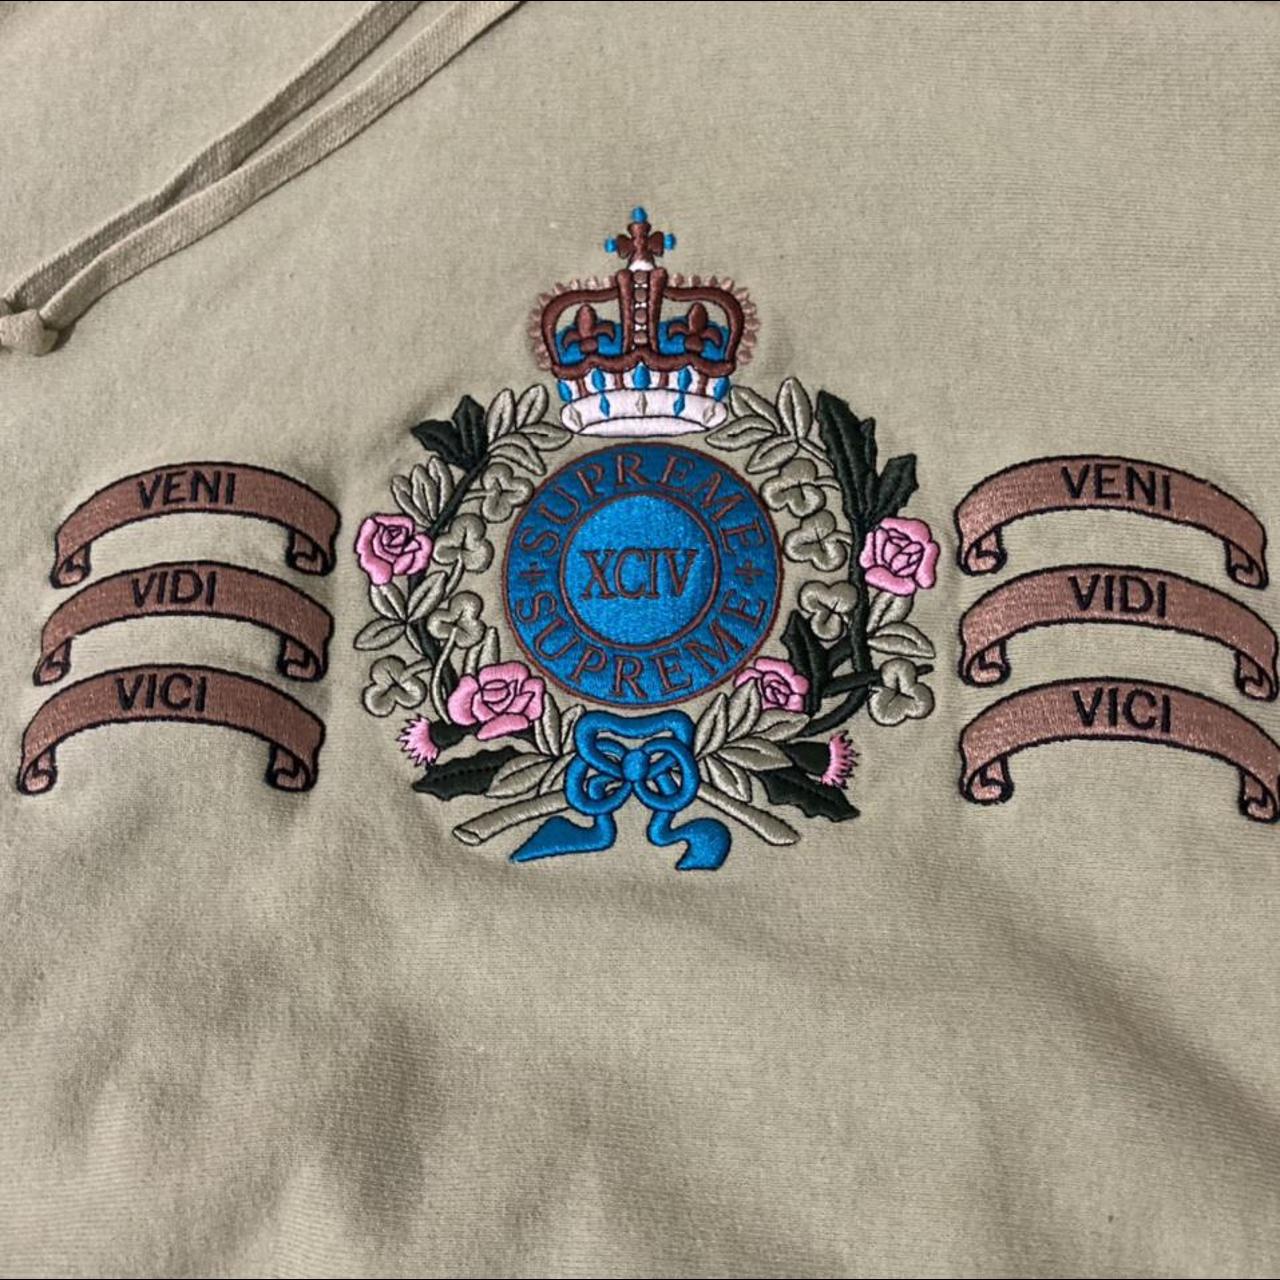 Product Image 2 - Supreme embroided Crest Hoodie “veni